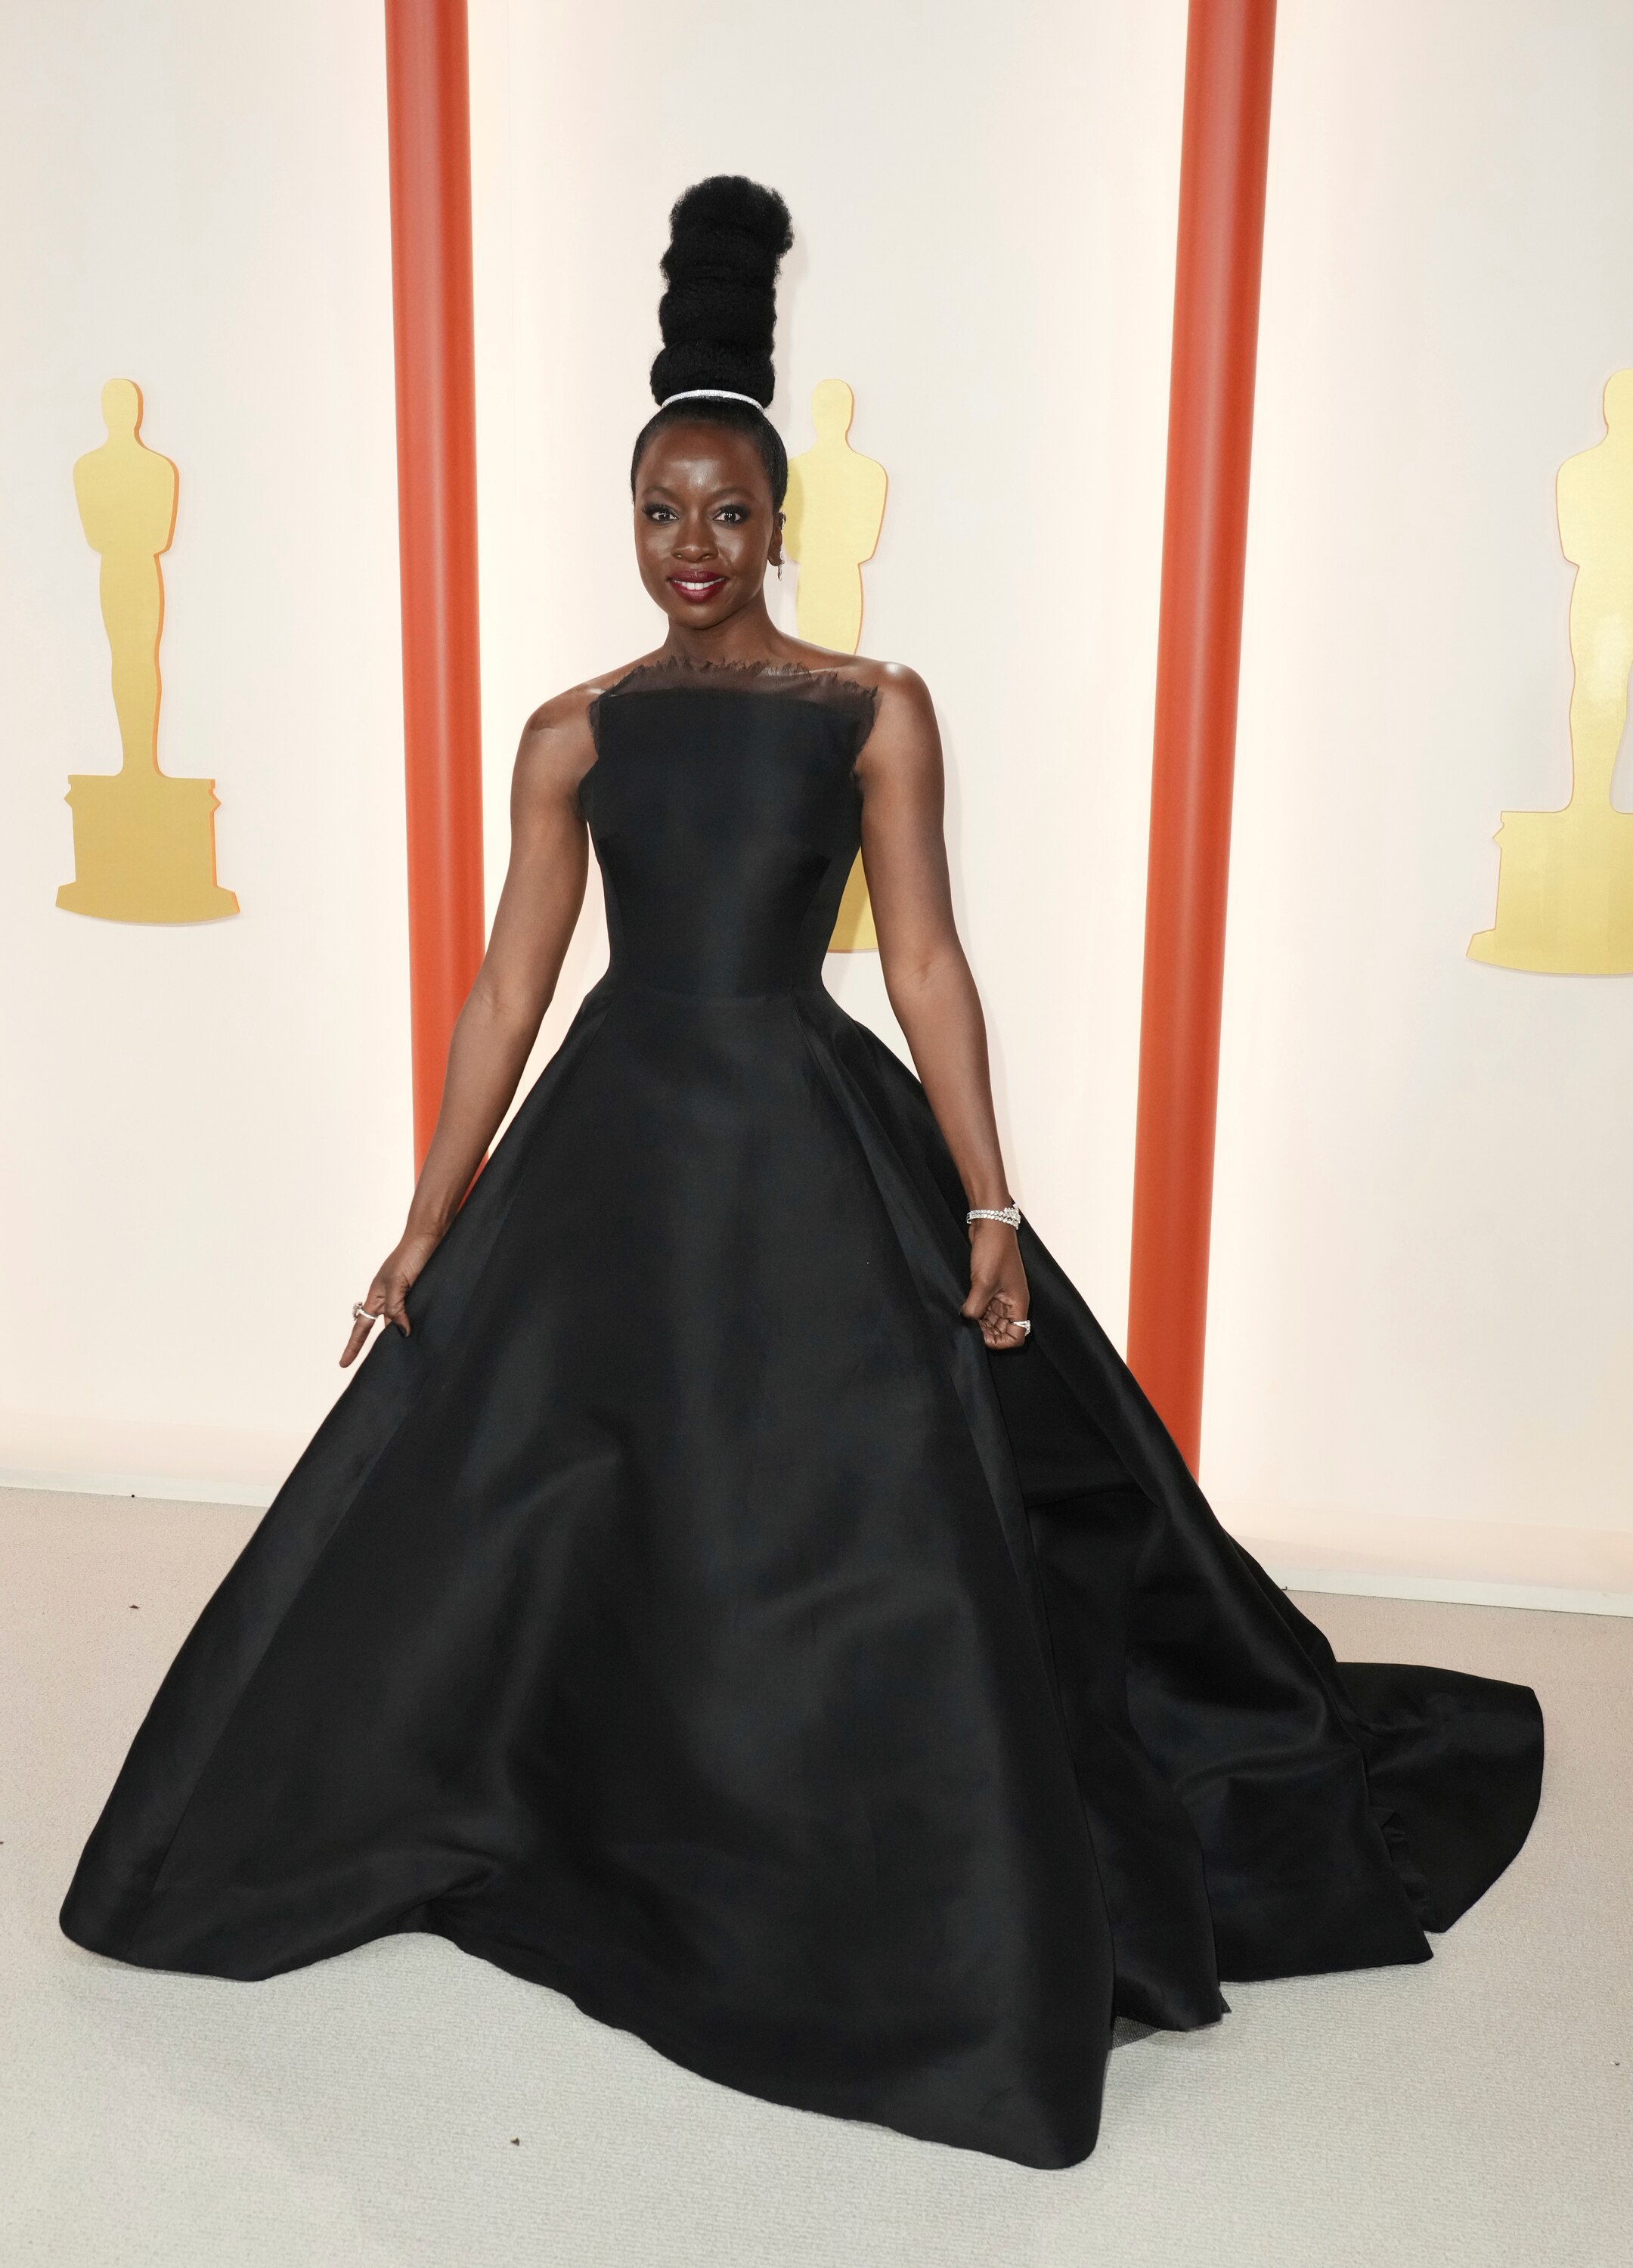 Danai Gurira wearing a strapless black floor-length gown with a structure bodice and a full, voluminous skirt